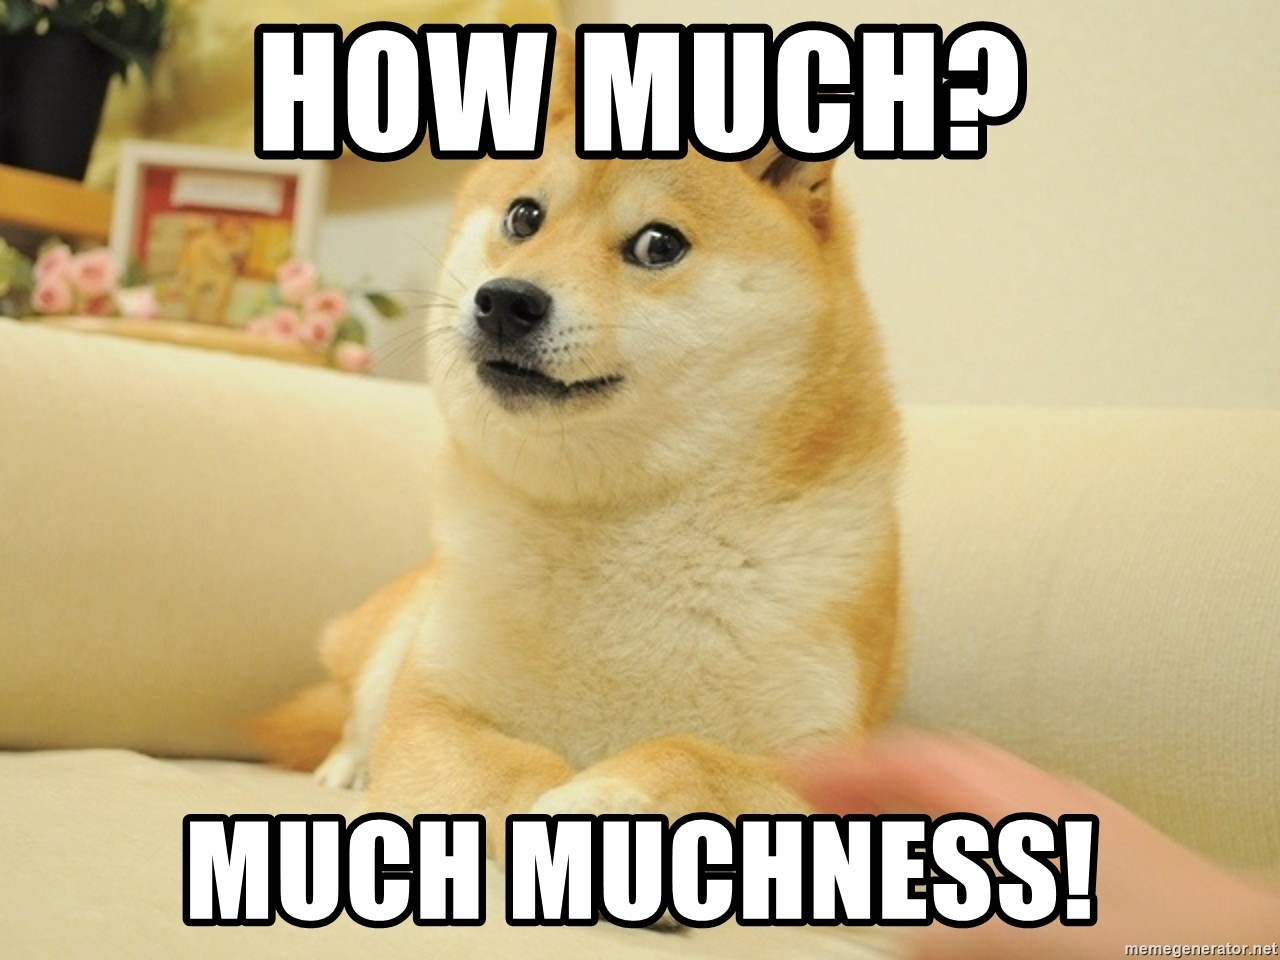 a doge meme with the dog asking "how much"